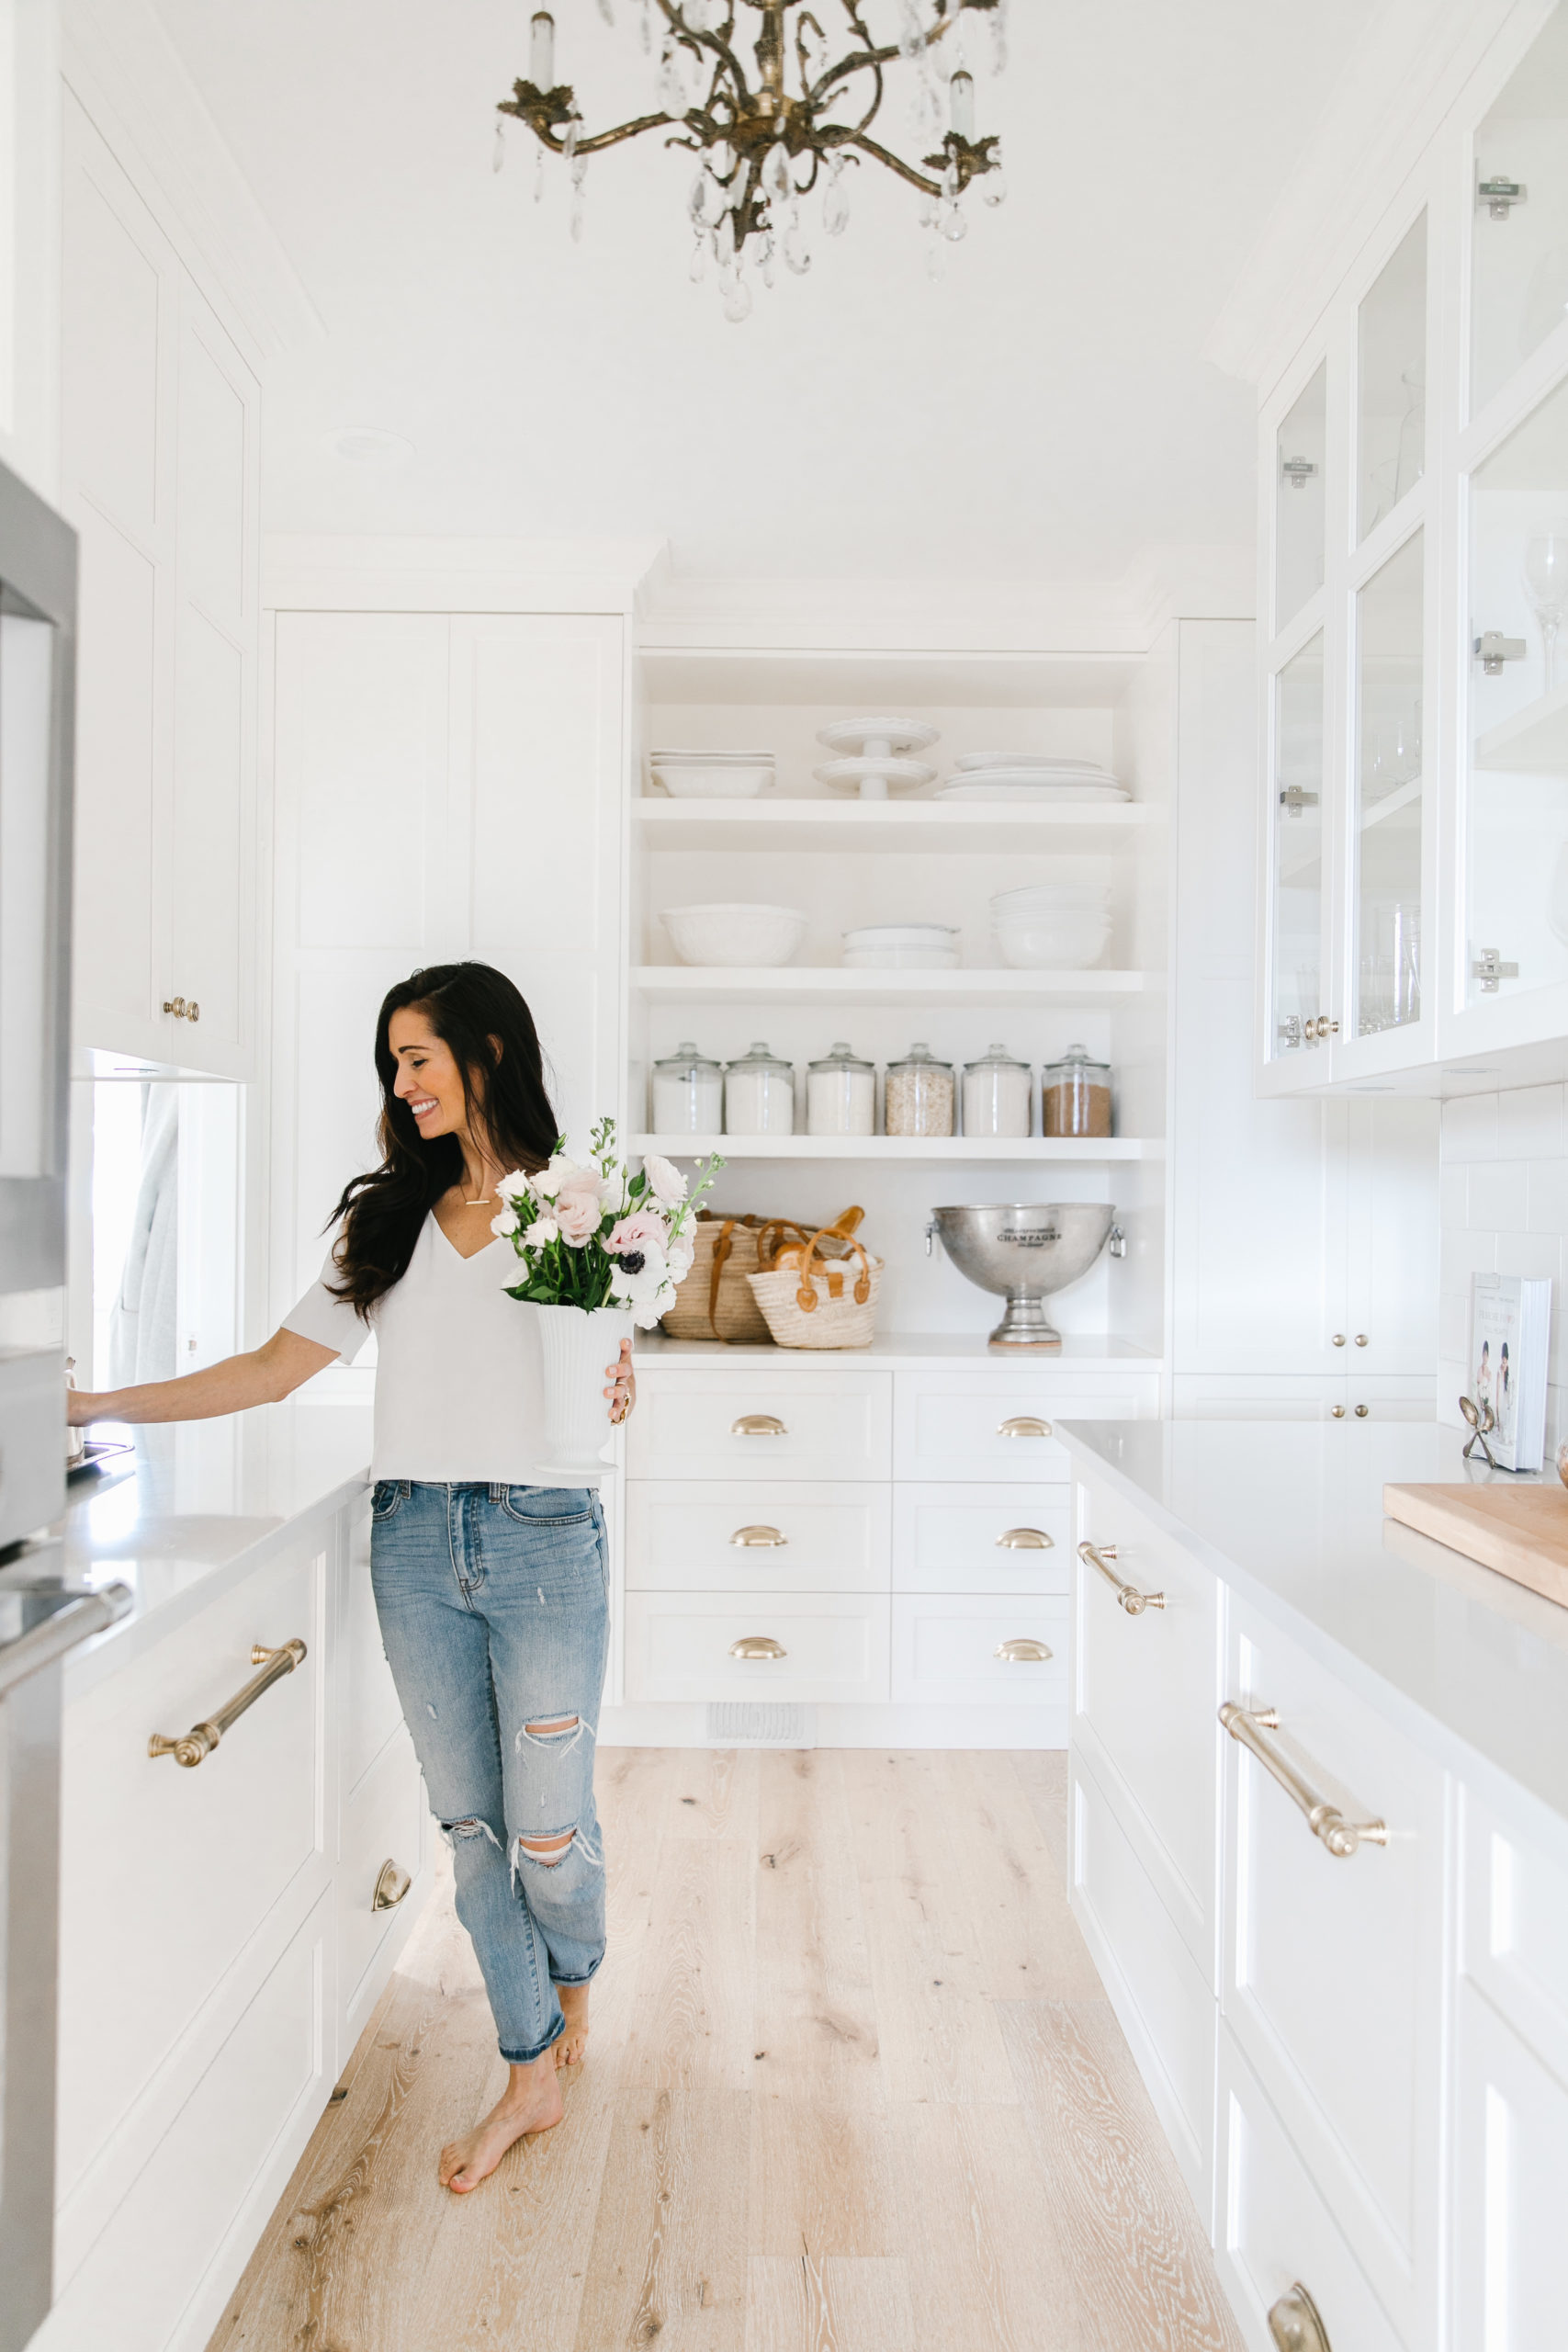 We're revealing our Pantry design and how we've organized everything! We found inspiration in so many things and are so happy with how it's all come together!